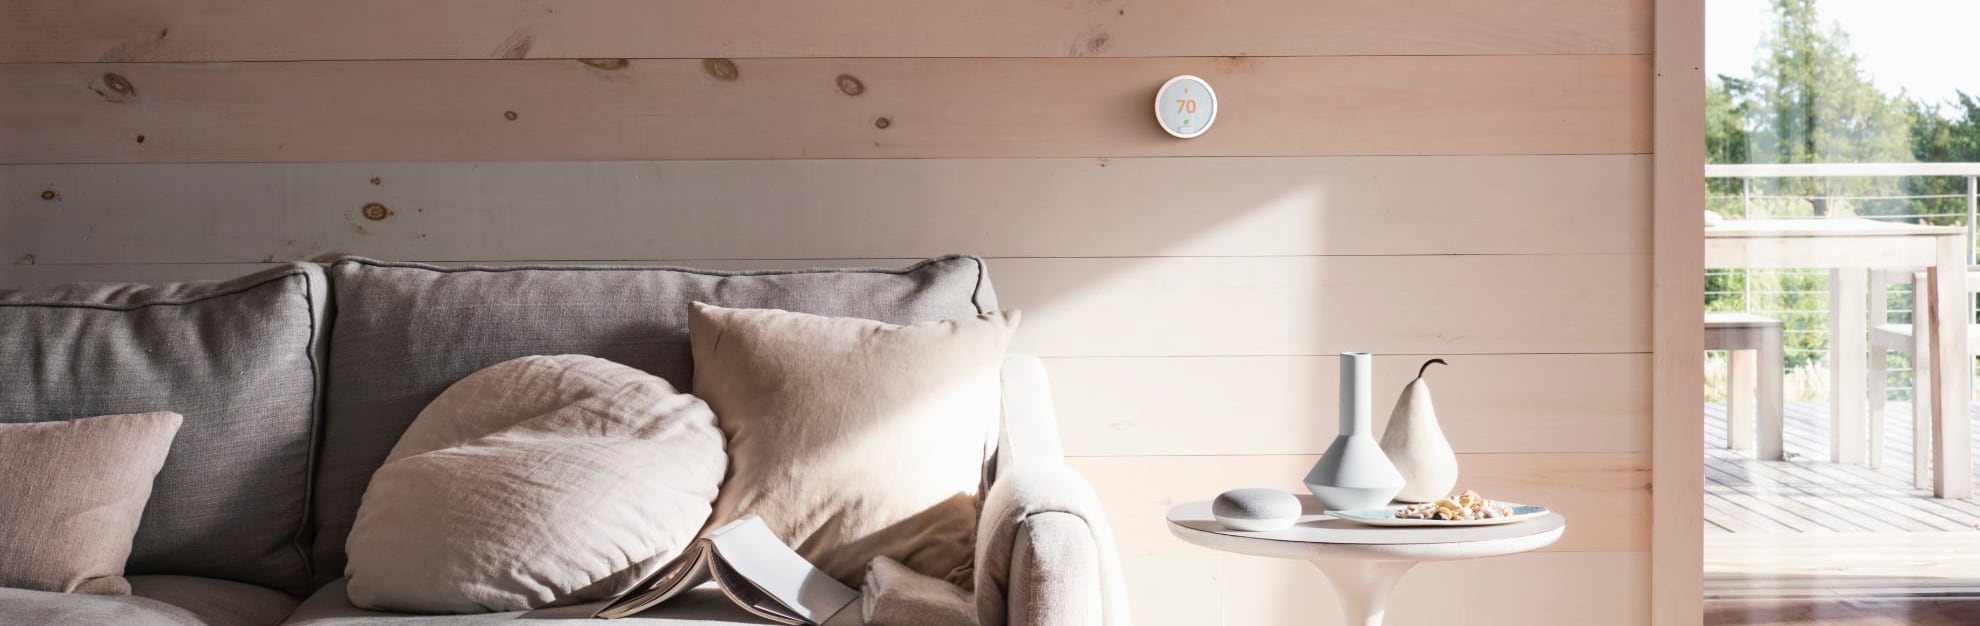 Vivint Home Automation in Scottsdale